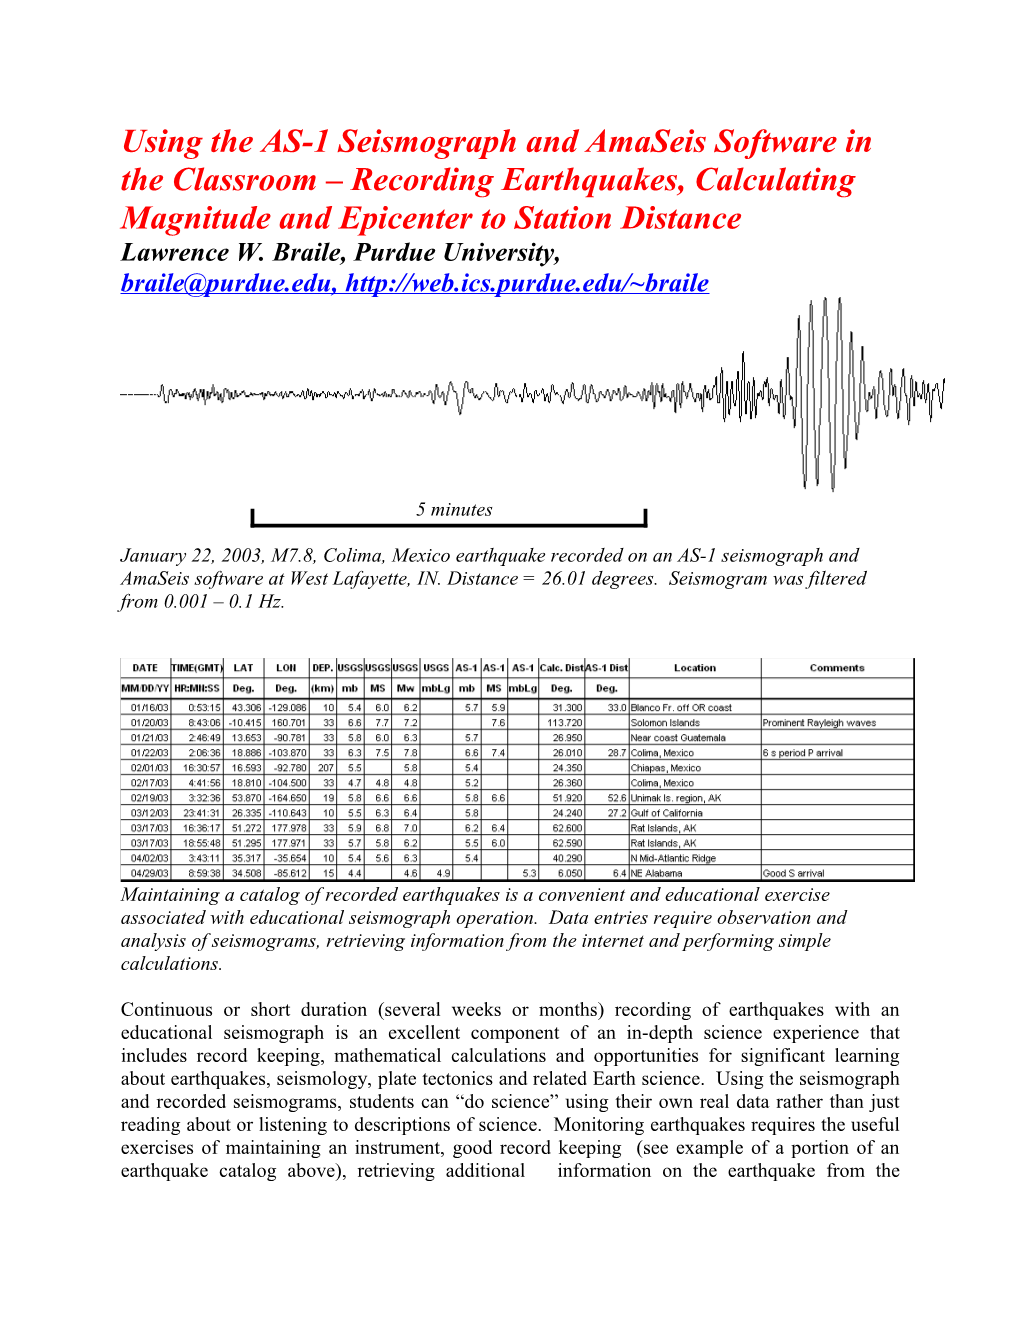 Using the AS-1 Seismograph and Amaseis Software in the Classroom Recording Earthquakes